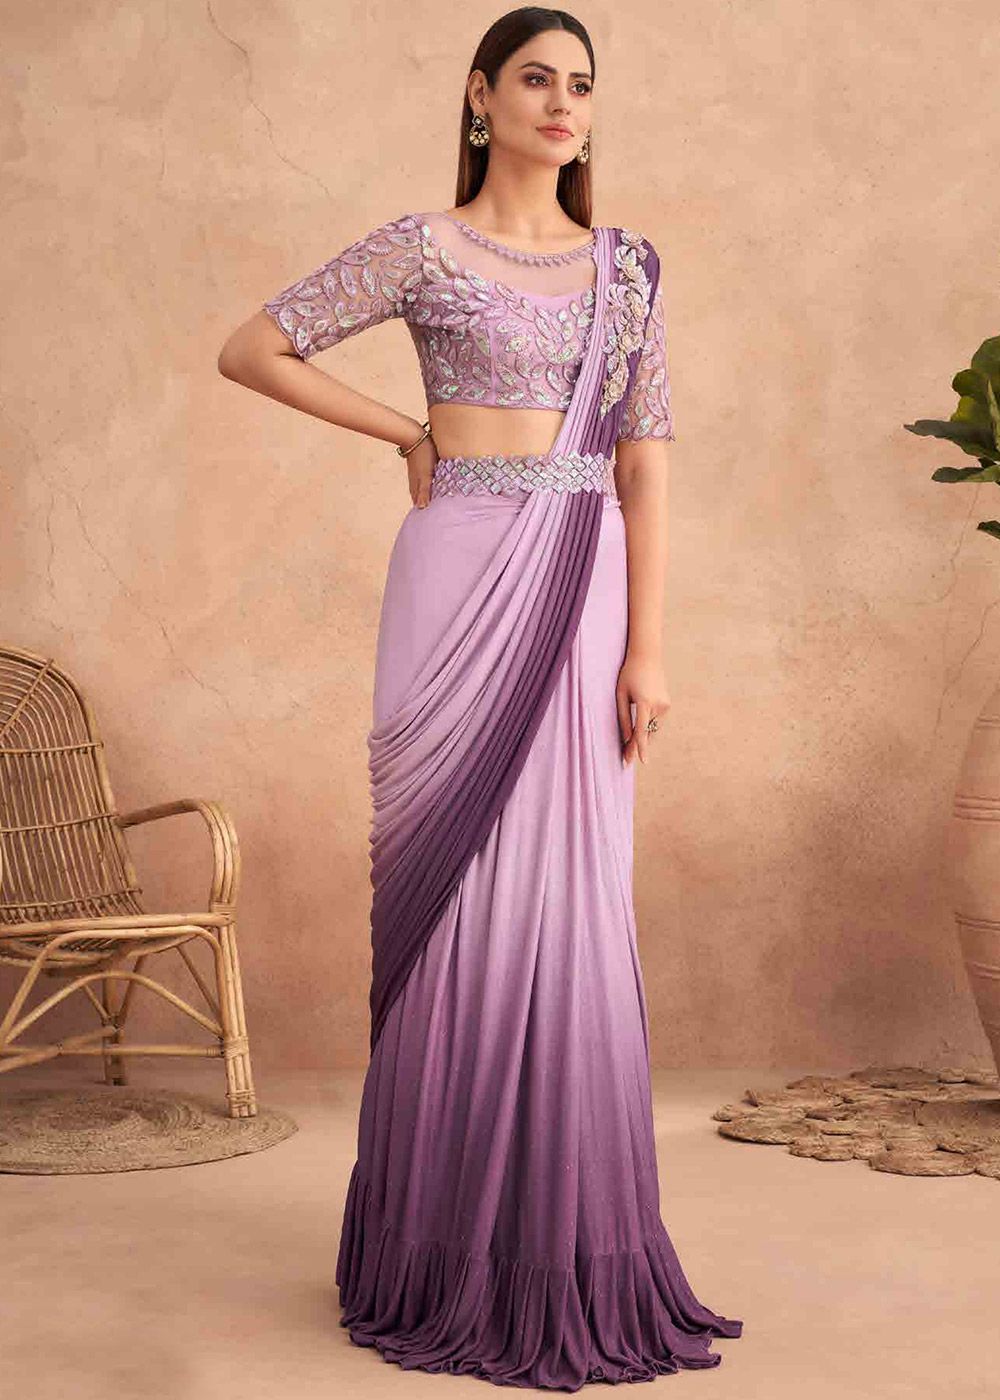 Discover more than 138 lehenga style ready made saree best